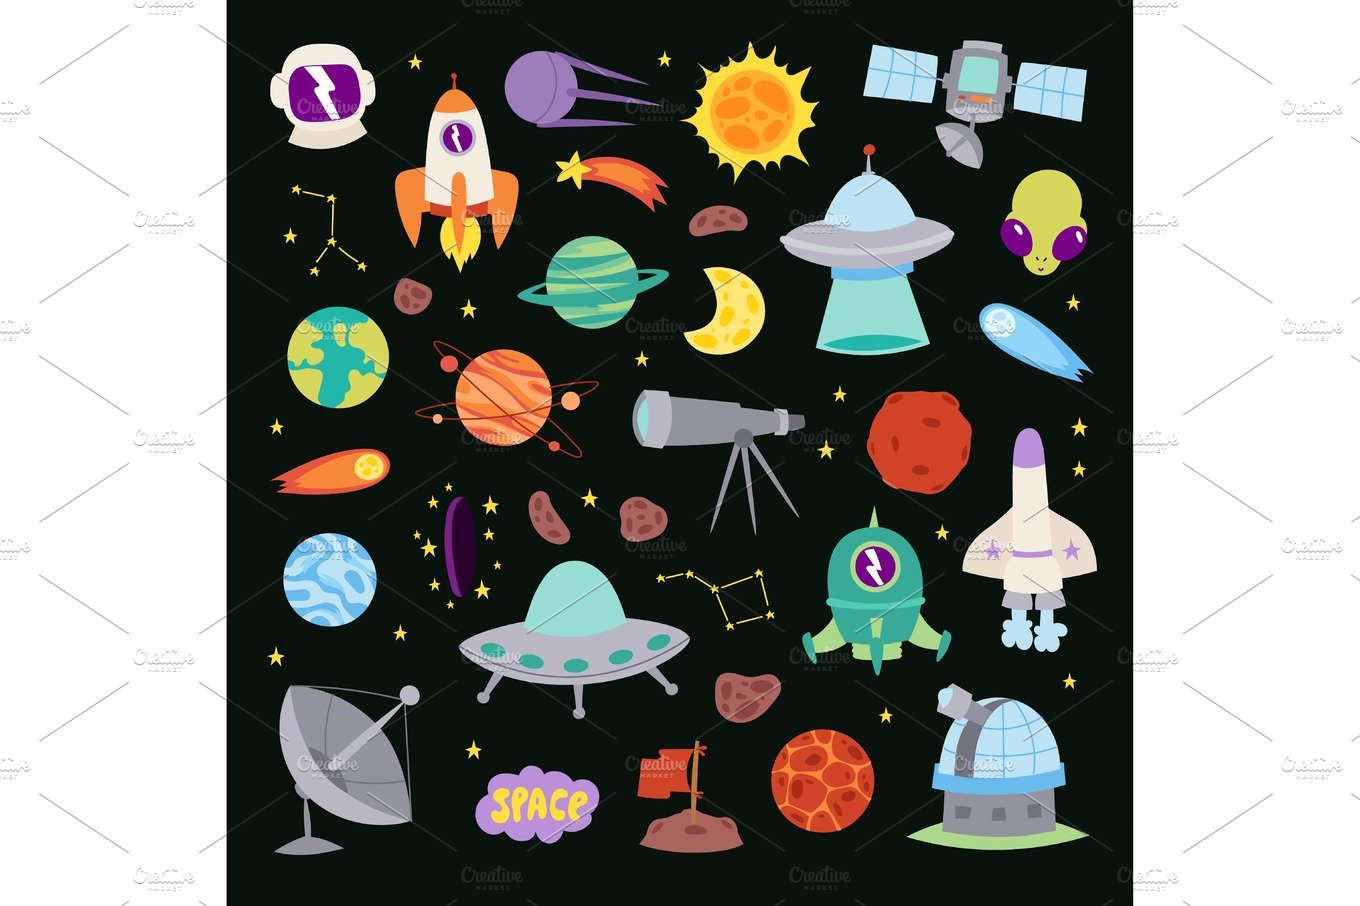 Astronomy icons stickers vector set, astronaut collection cover image.